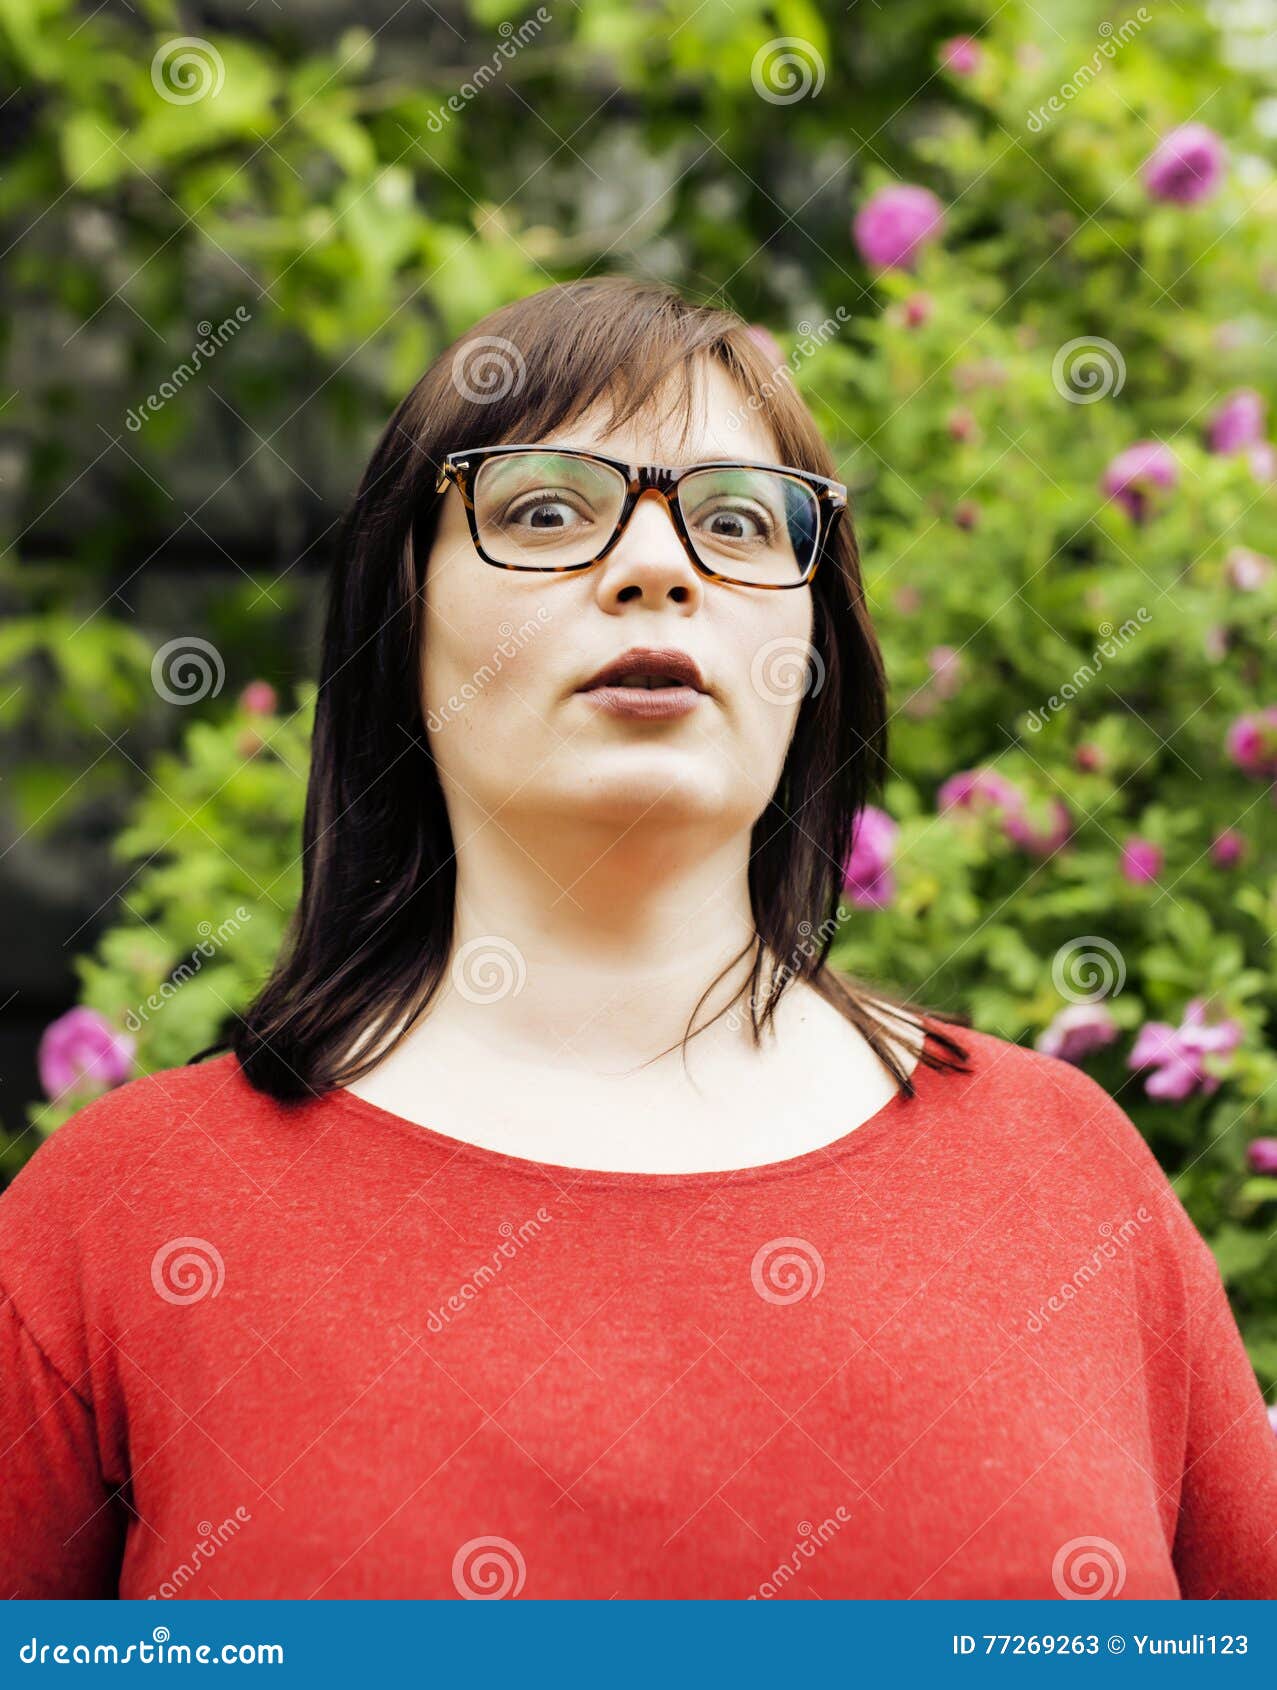 Pretty Modern Mature Fat Woman Outside Wearing Glasses, Emotional ... People With Thick Glasses